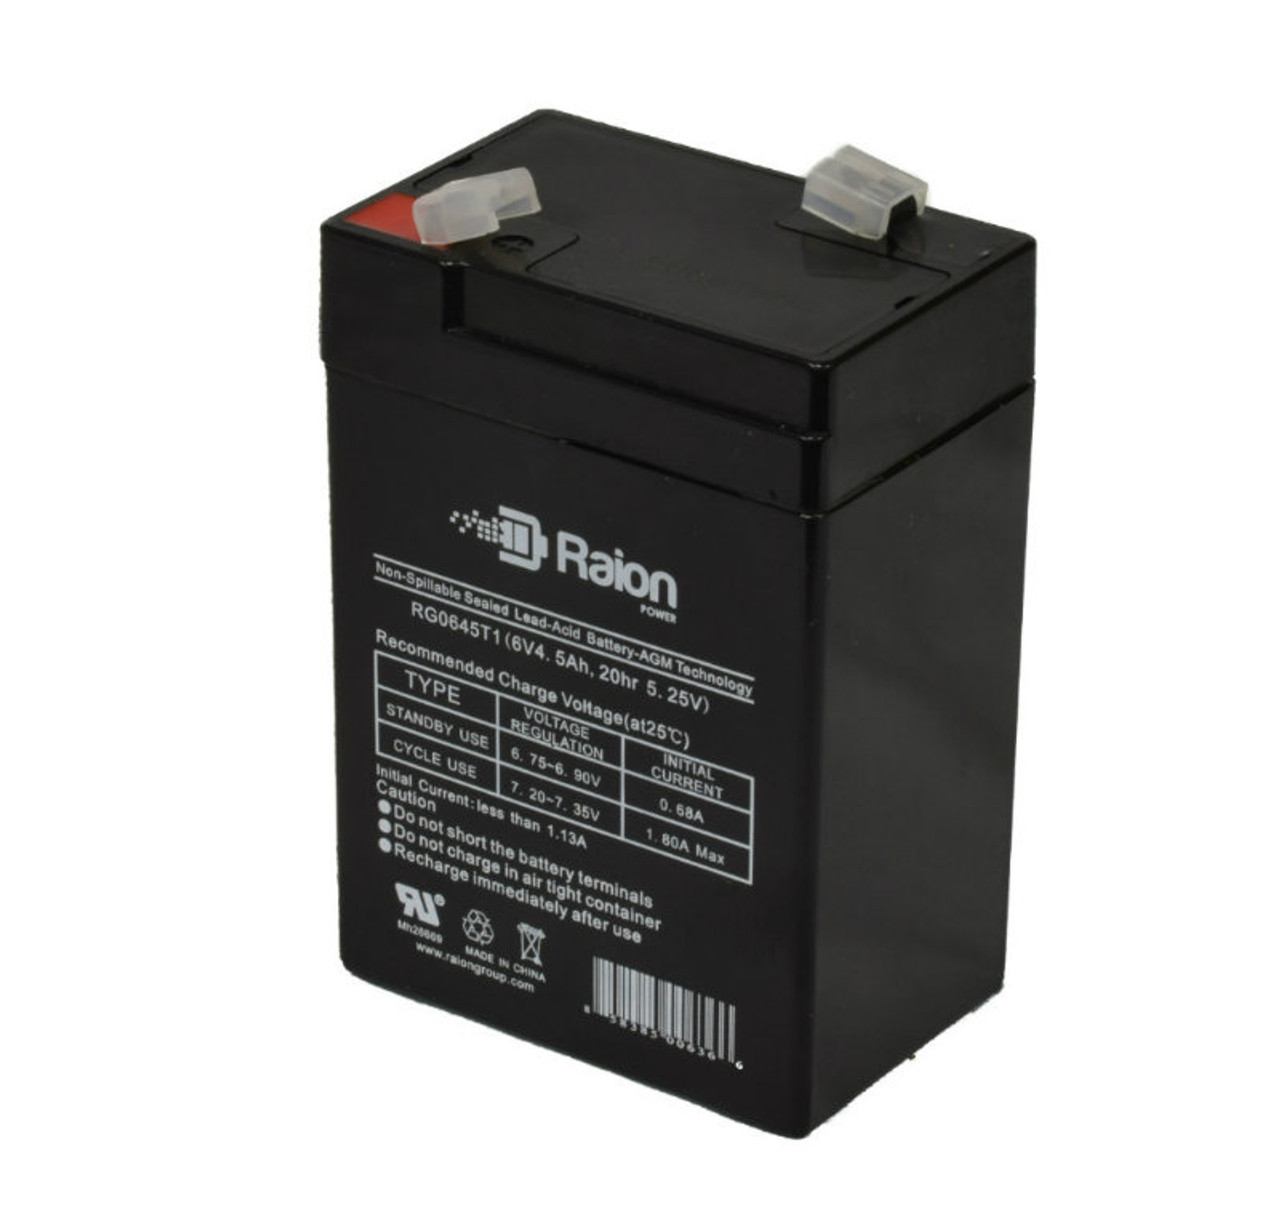 Raion Power RG0645T1 6V 4.5Ah Replacement Battery Cartridge for BCI Inc 70000A1